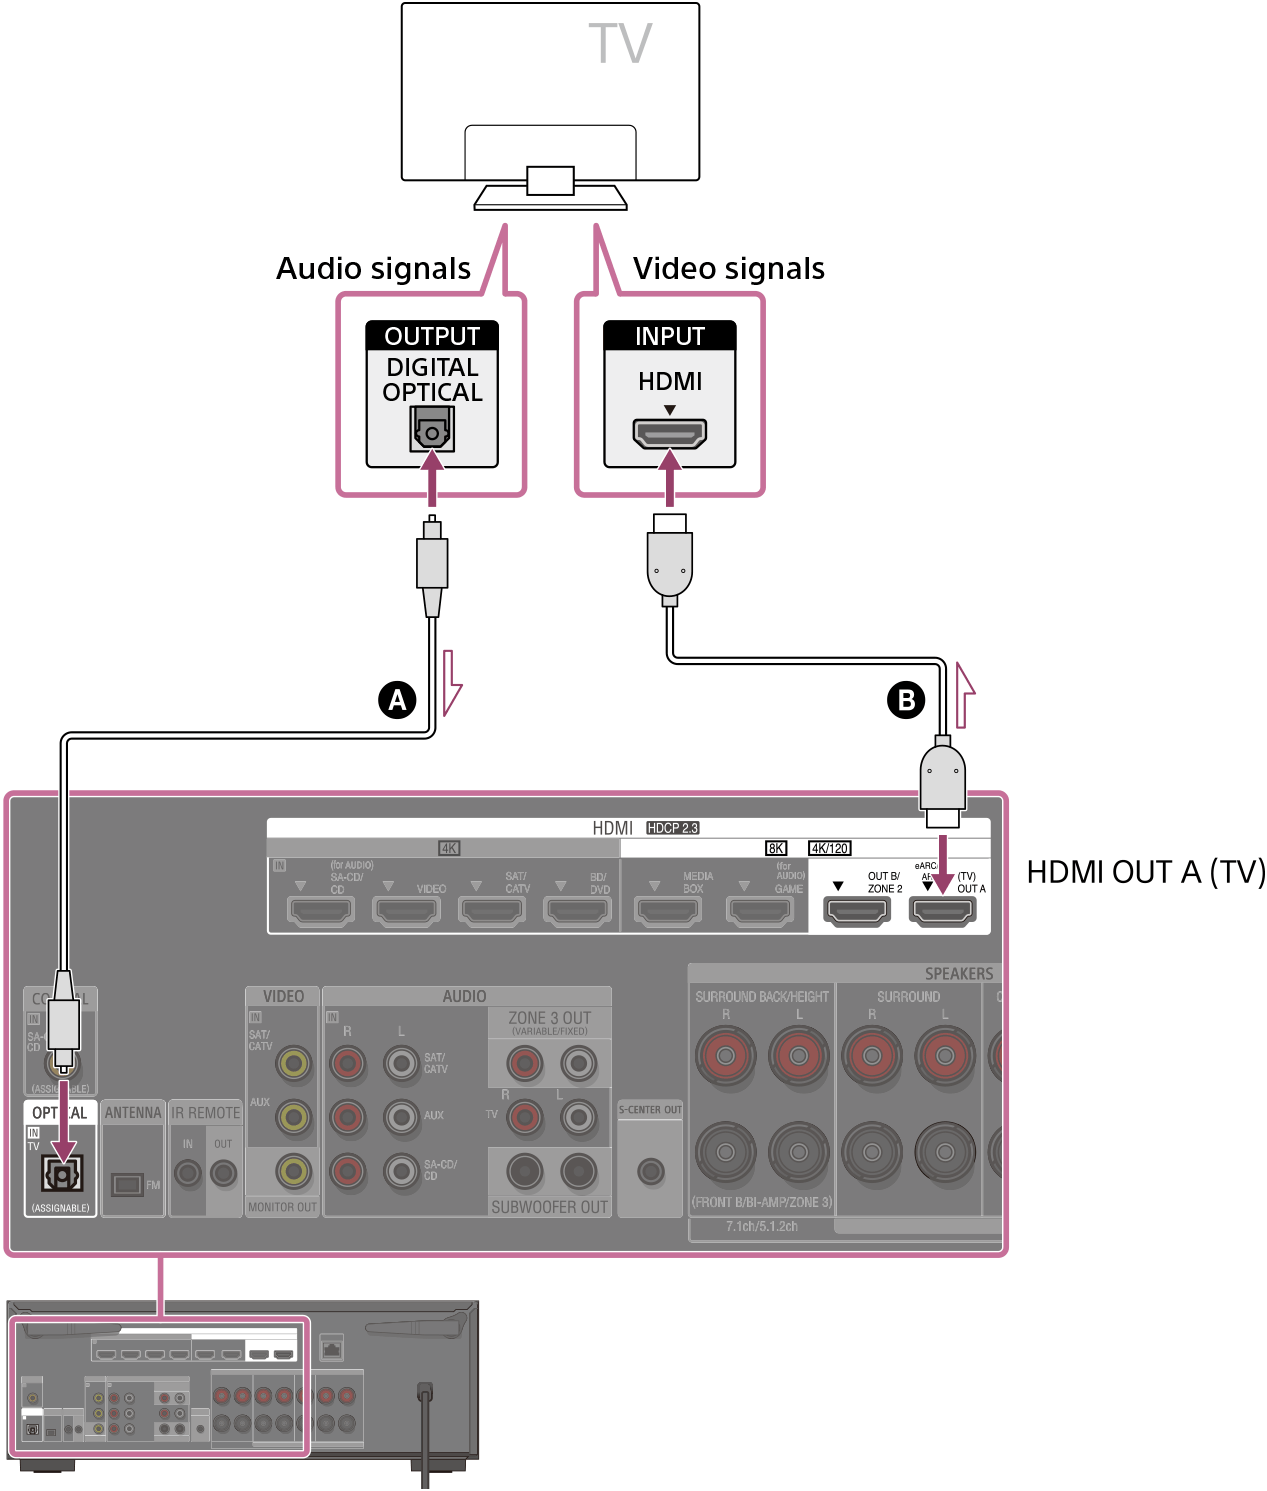 Illustration of connecting the TV and unit. Connect the HDMI OUT A (TV) jack on the rear of the unit with the HDMI INPUT jack on your TV using an HDMI cable (not supplied). Connect the OPTICAL IN TV jack on the rear of the unit with the DIGITAL OPTICAL OUTPUT jack on your TV using an optical digital cable (not supplied).